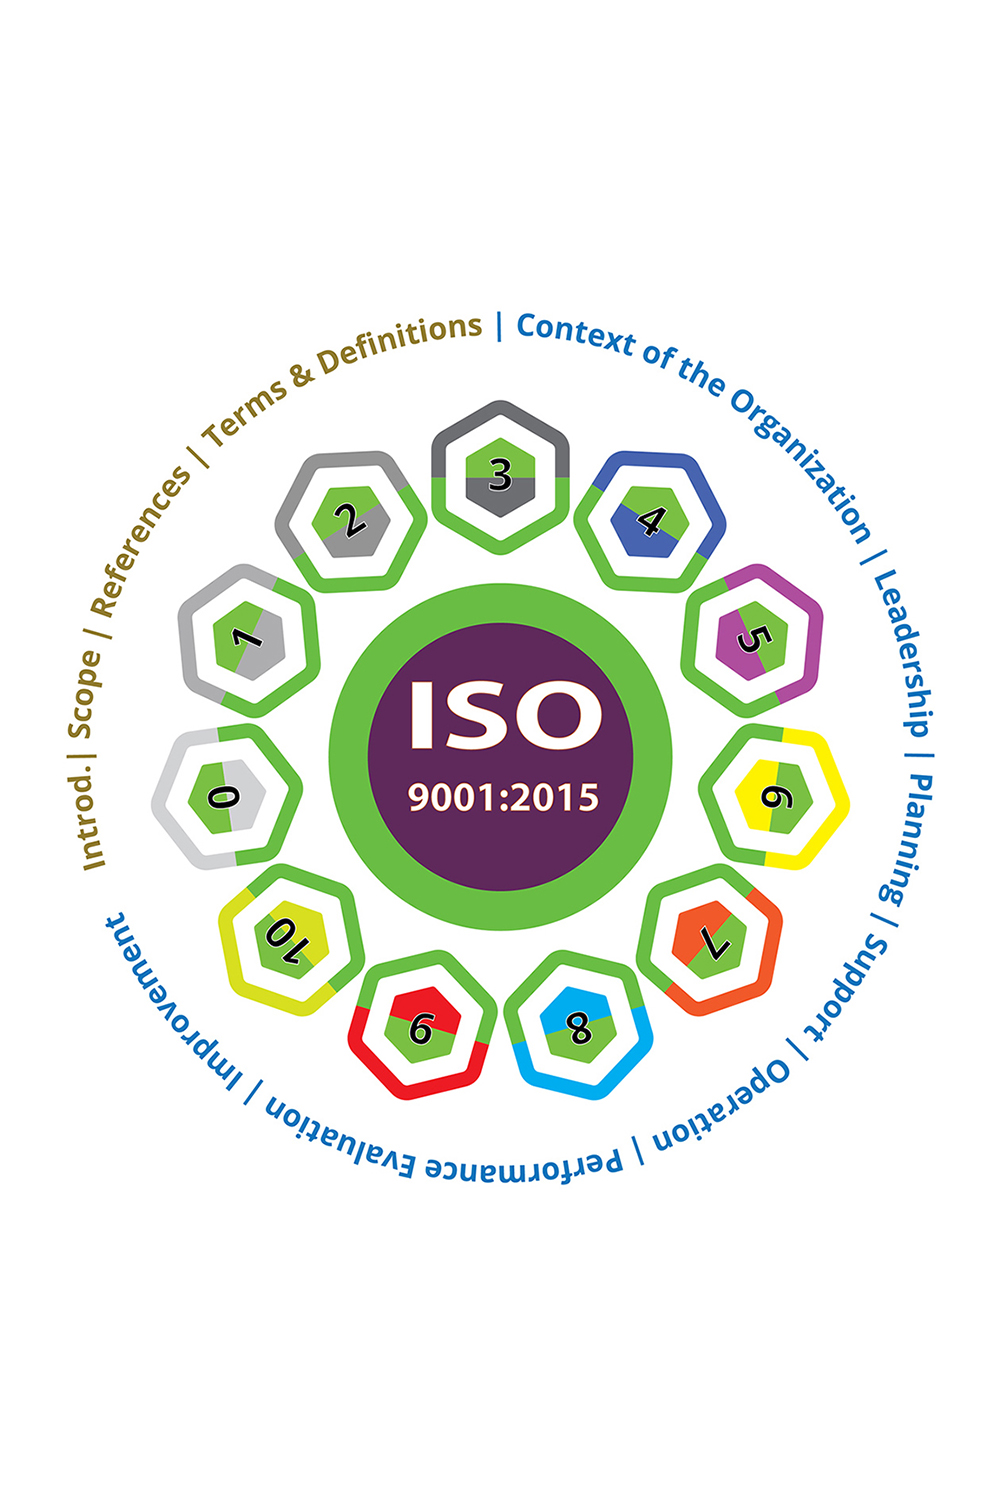 ISO 9001:2015 Terms and Definitions design, fully editable pinterest preview image.